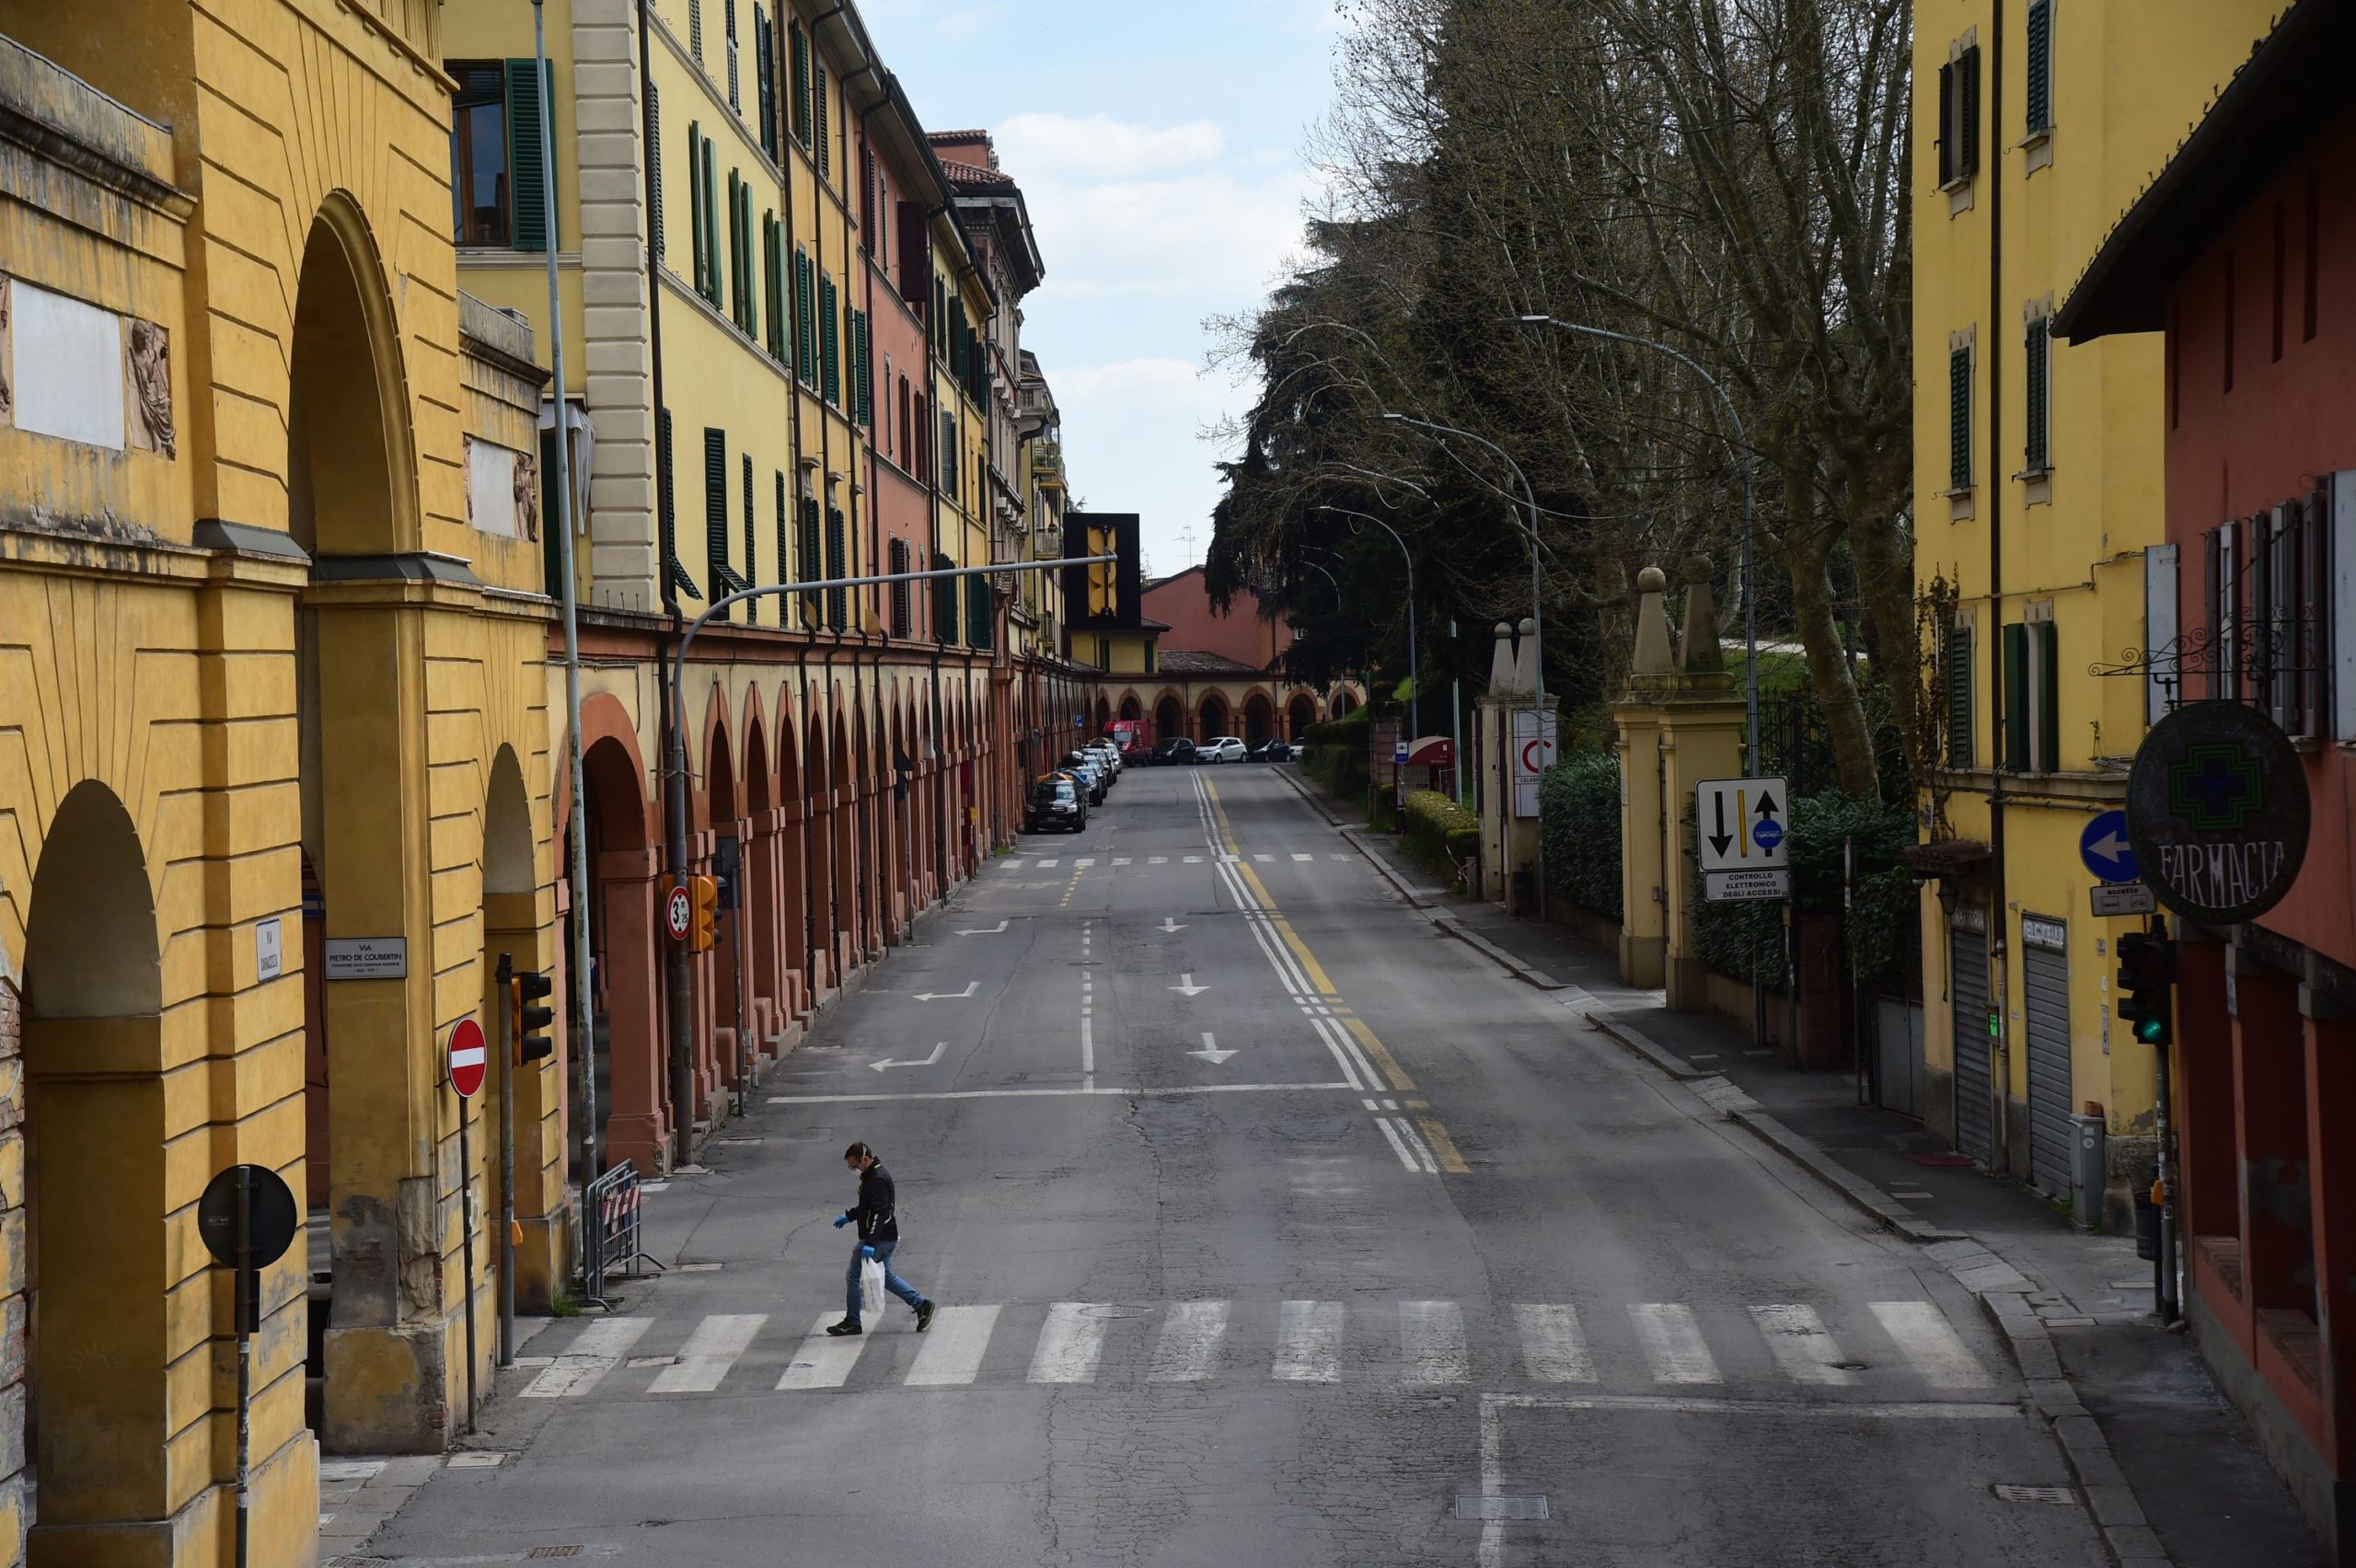 A man in a facemask walks across a street in Bologna.